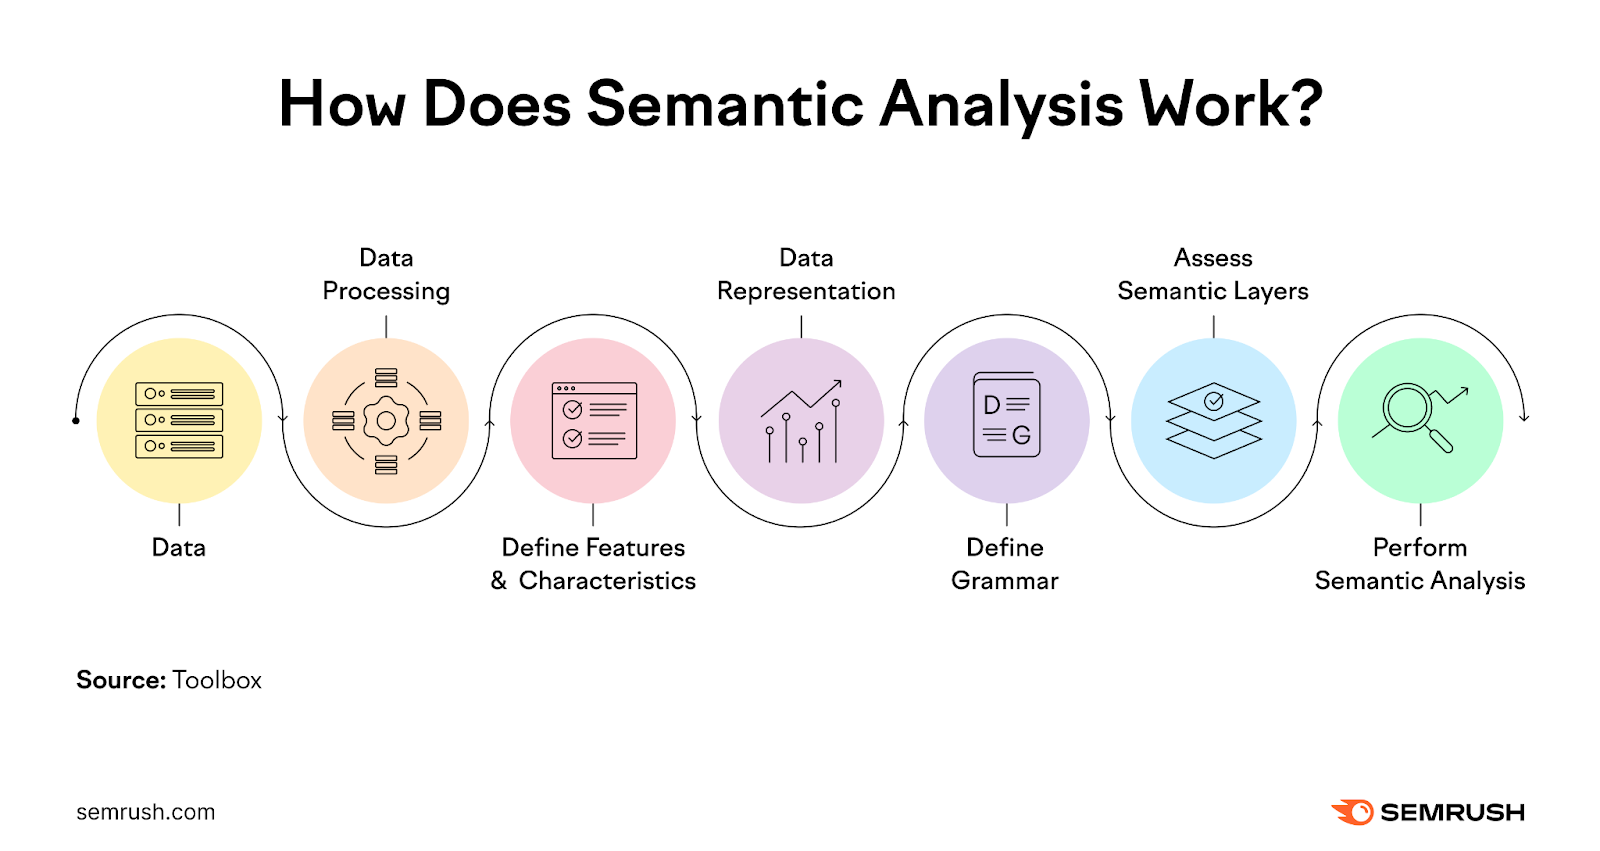 An infographic showing how semantic analysis works